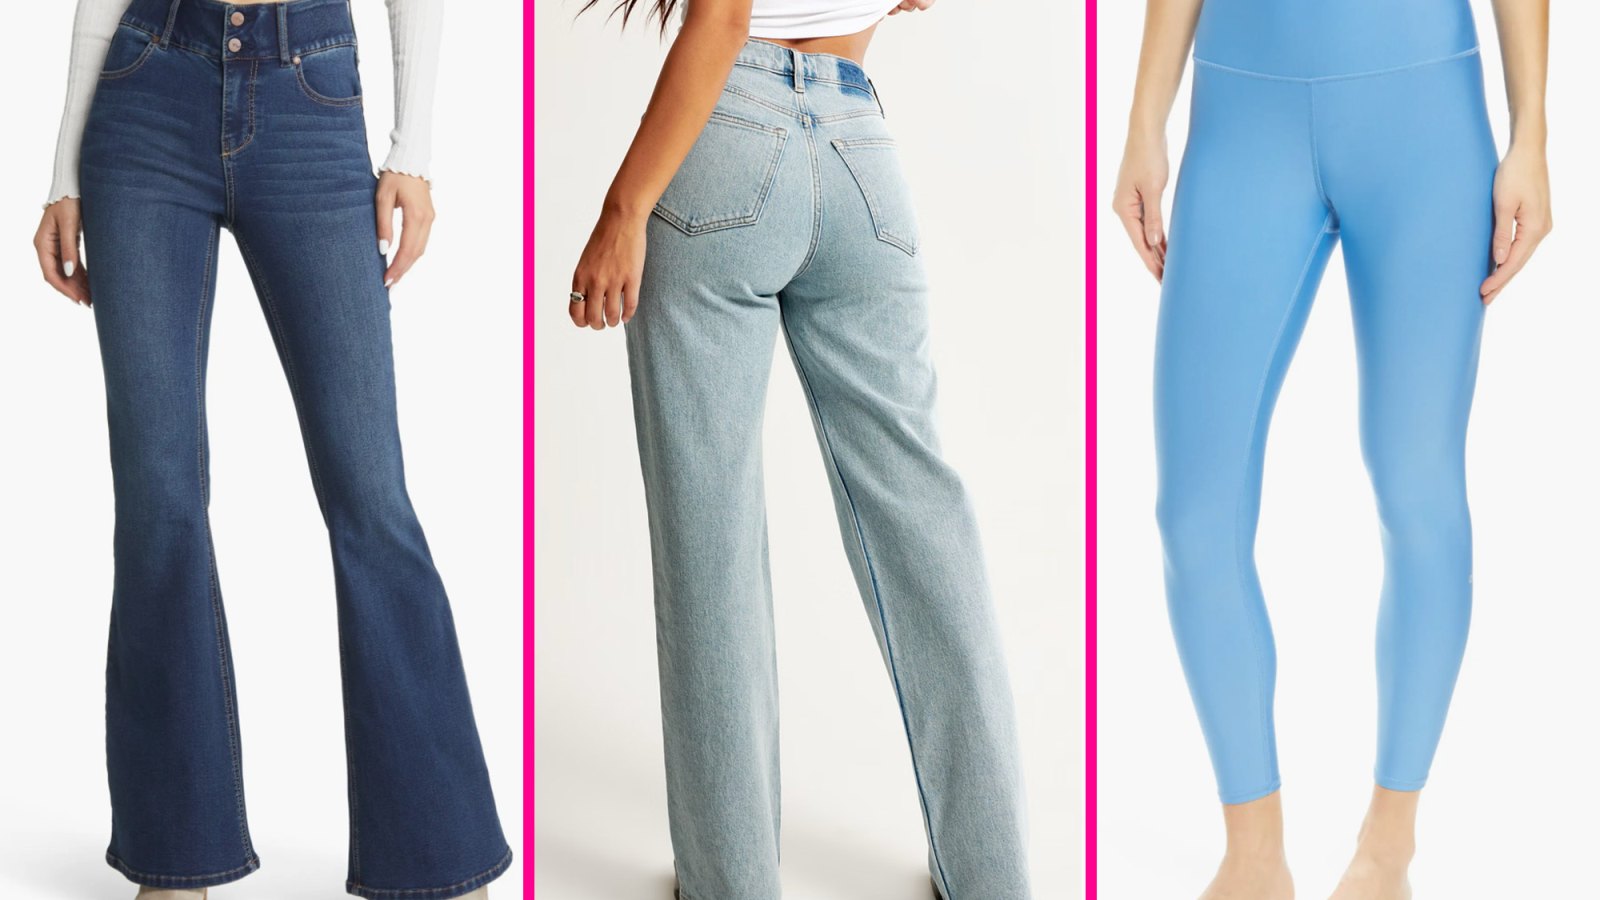 These flare pants are comfy and really accentuate my curves . . . #for